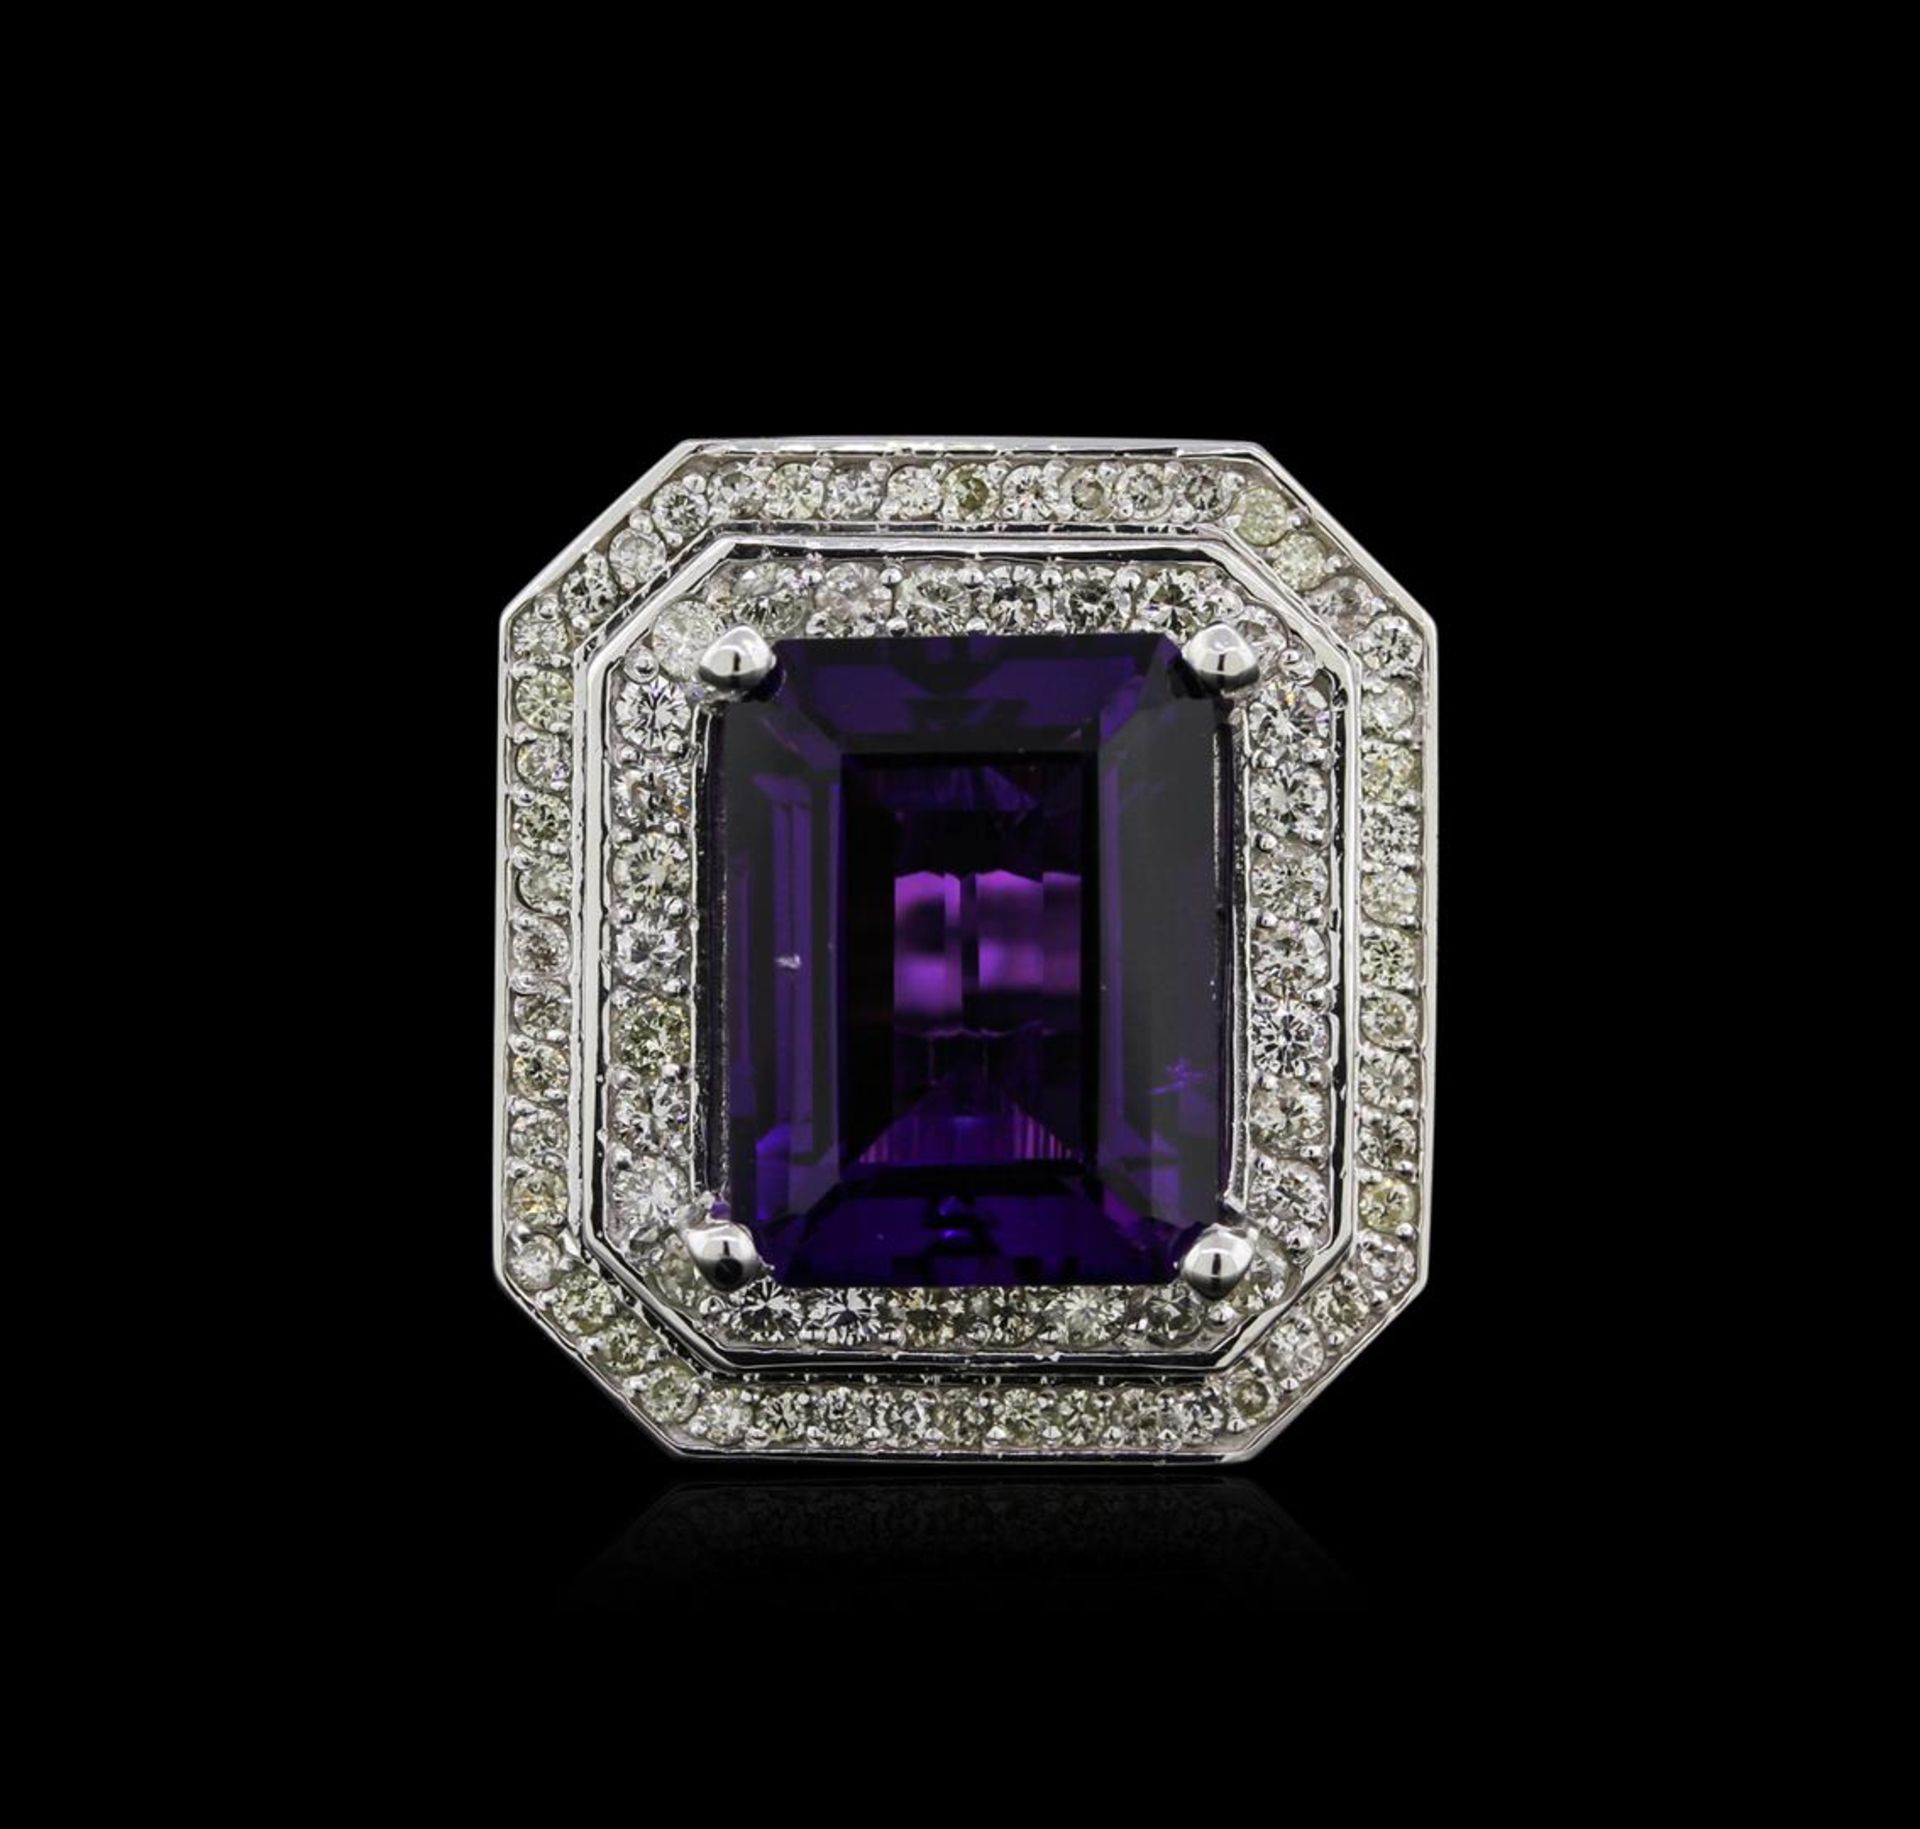 14KT White Gold 11.14 ctw Amethyst and Diamond Ring - Image 2 of 4